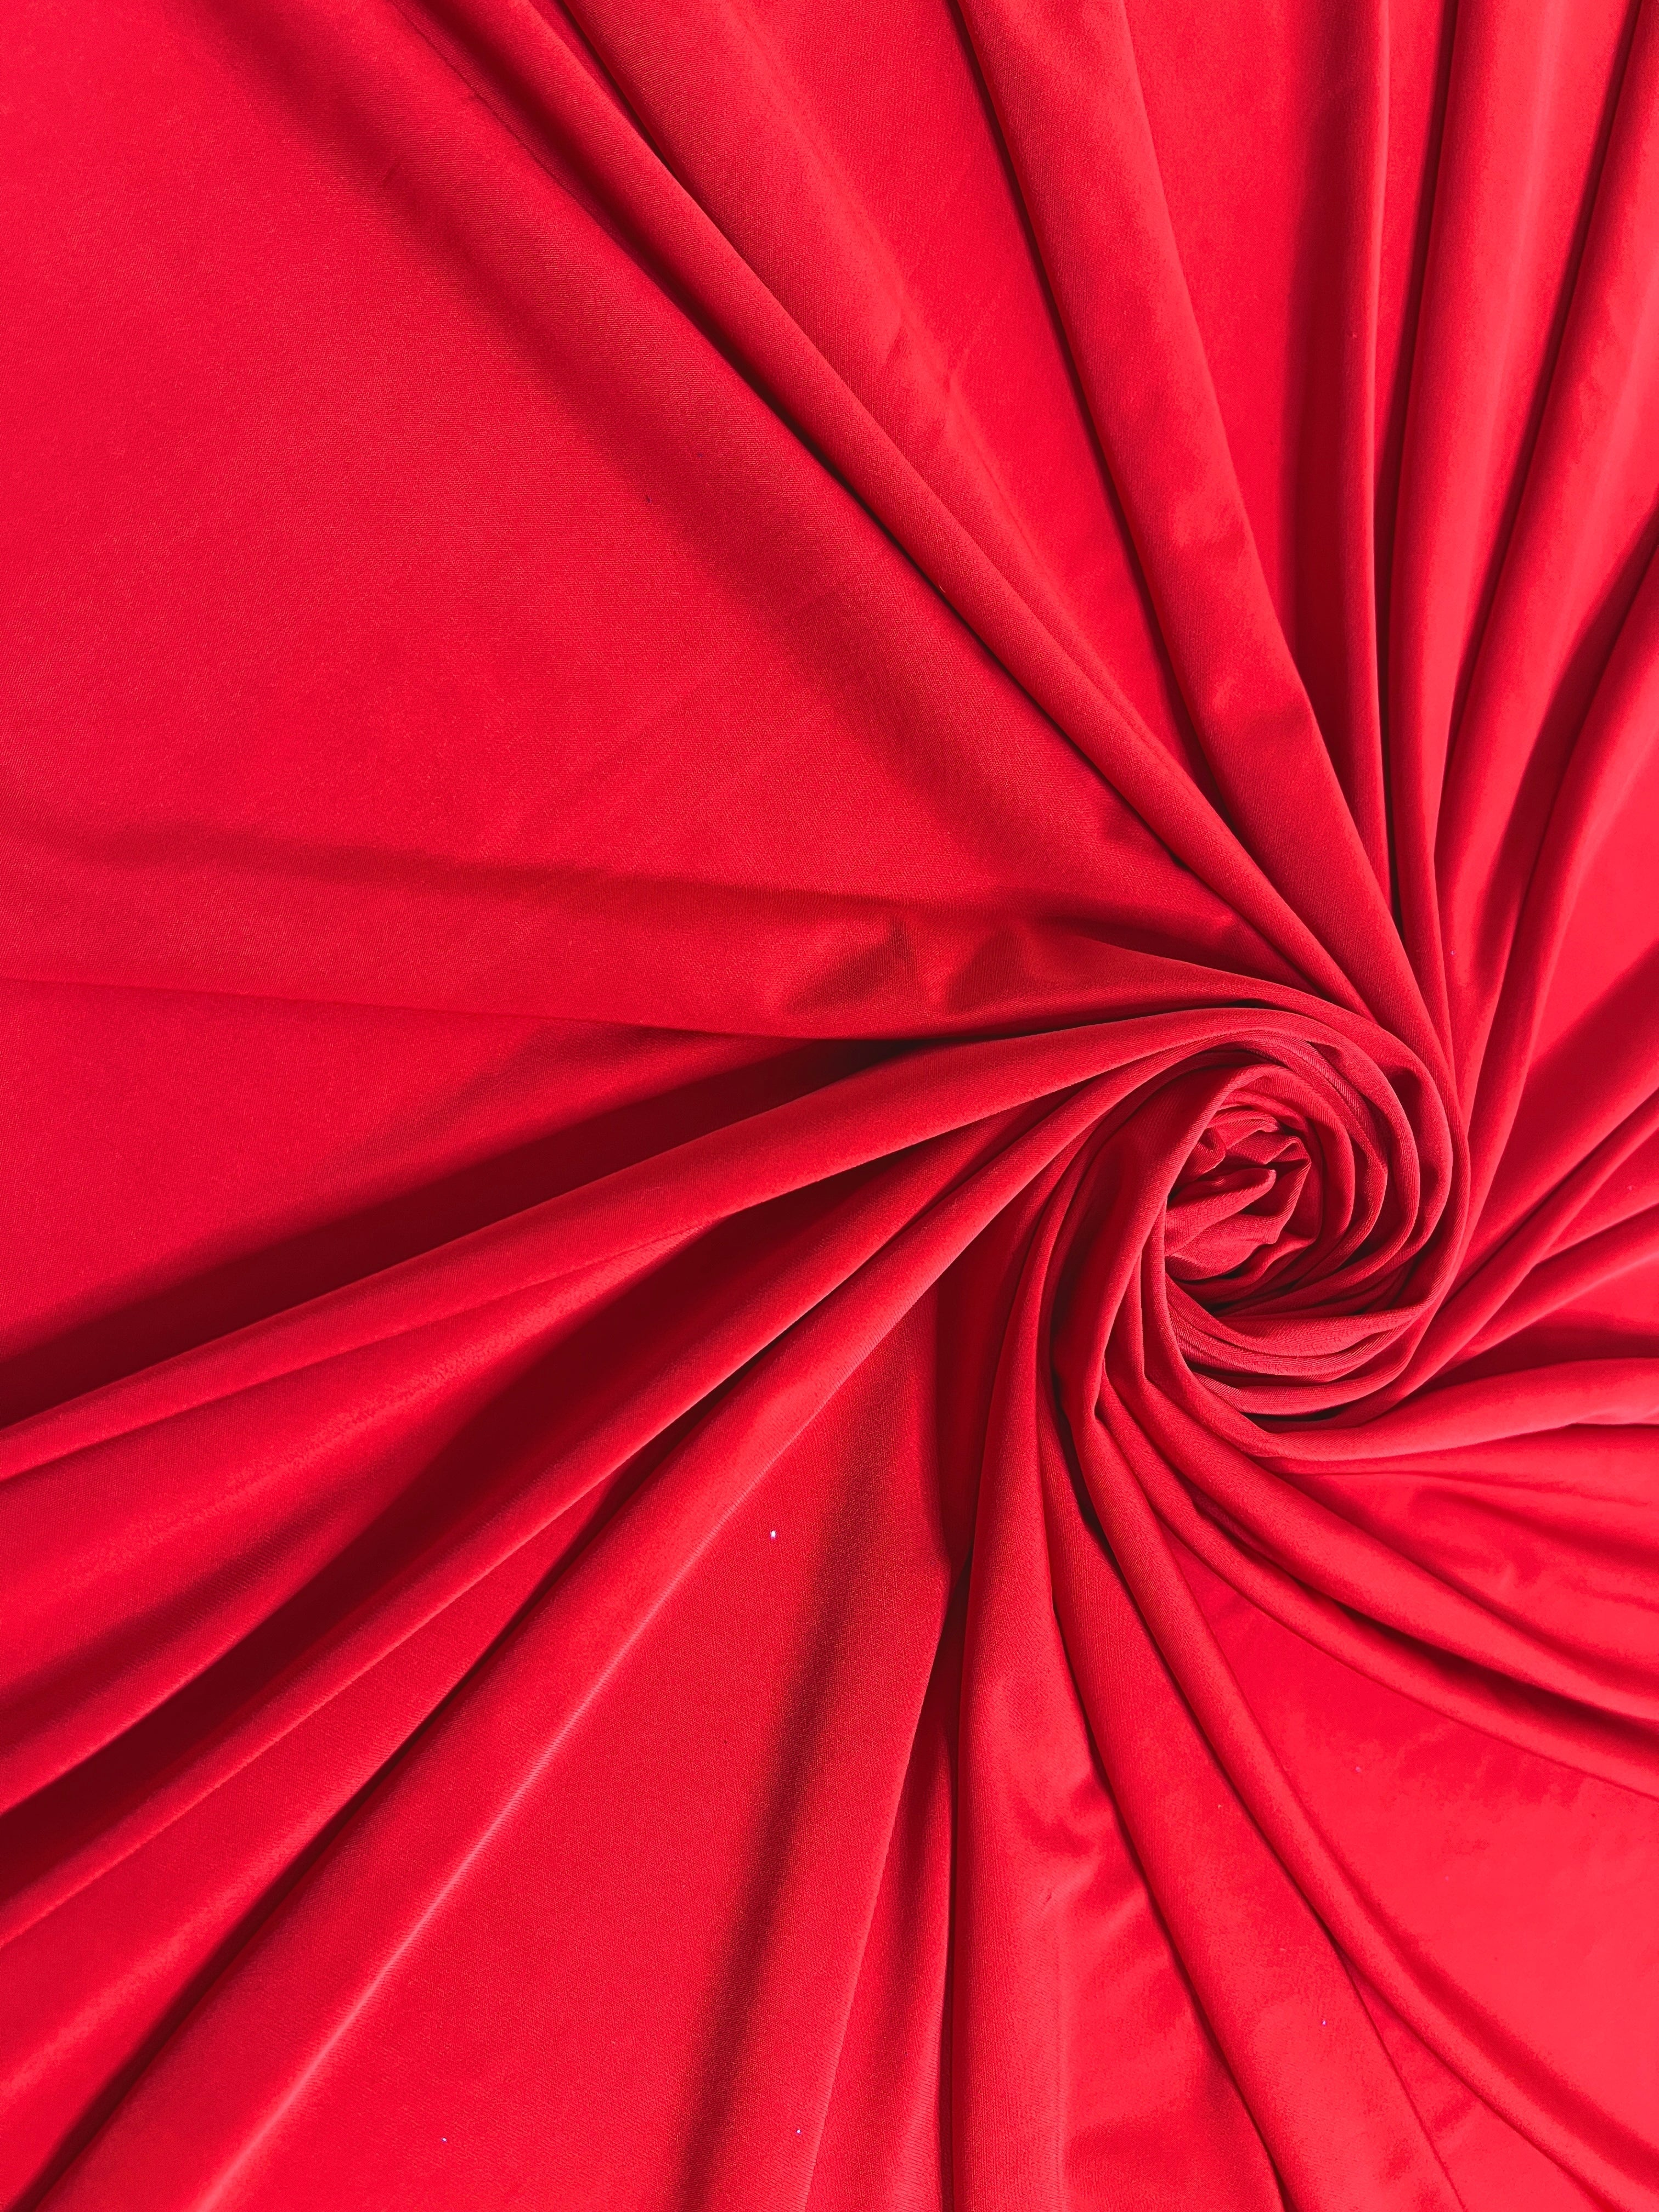 red ity spandex, 4 way stretch ity spandex, dark red ity spandex, shiny red ity spandex, ity spandex for woman in red, spandex for costume, spandex for sweatpants, spandex for gown, spandex on discount, spandex in low price, ity fabric on sale'